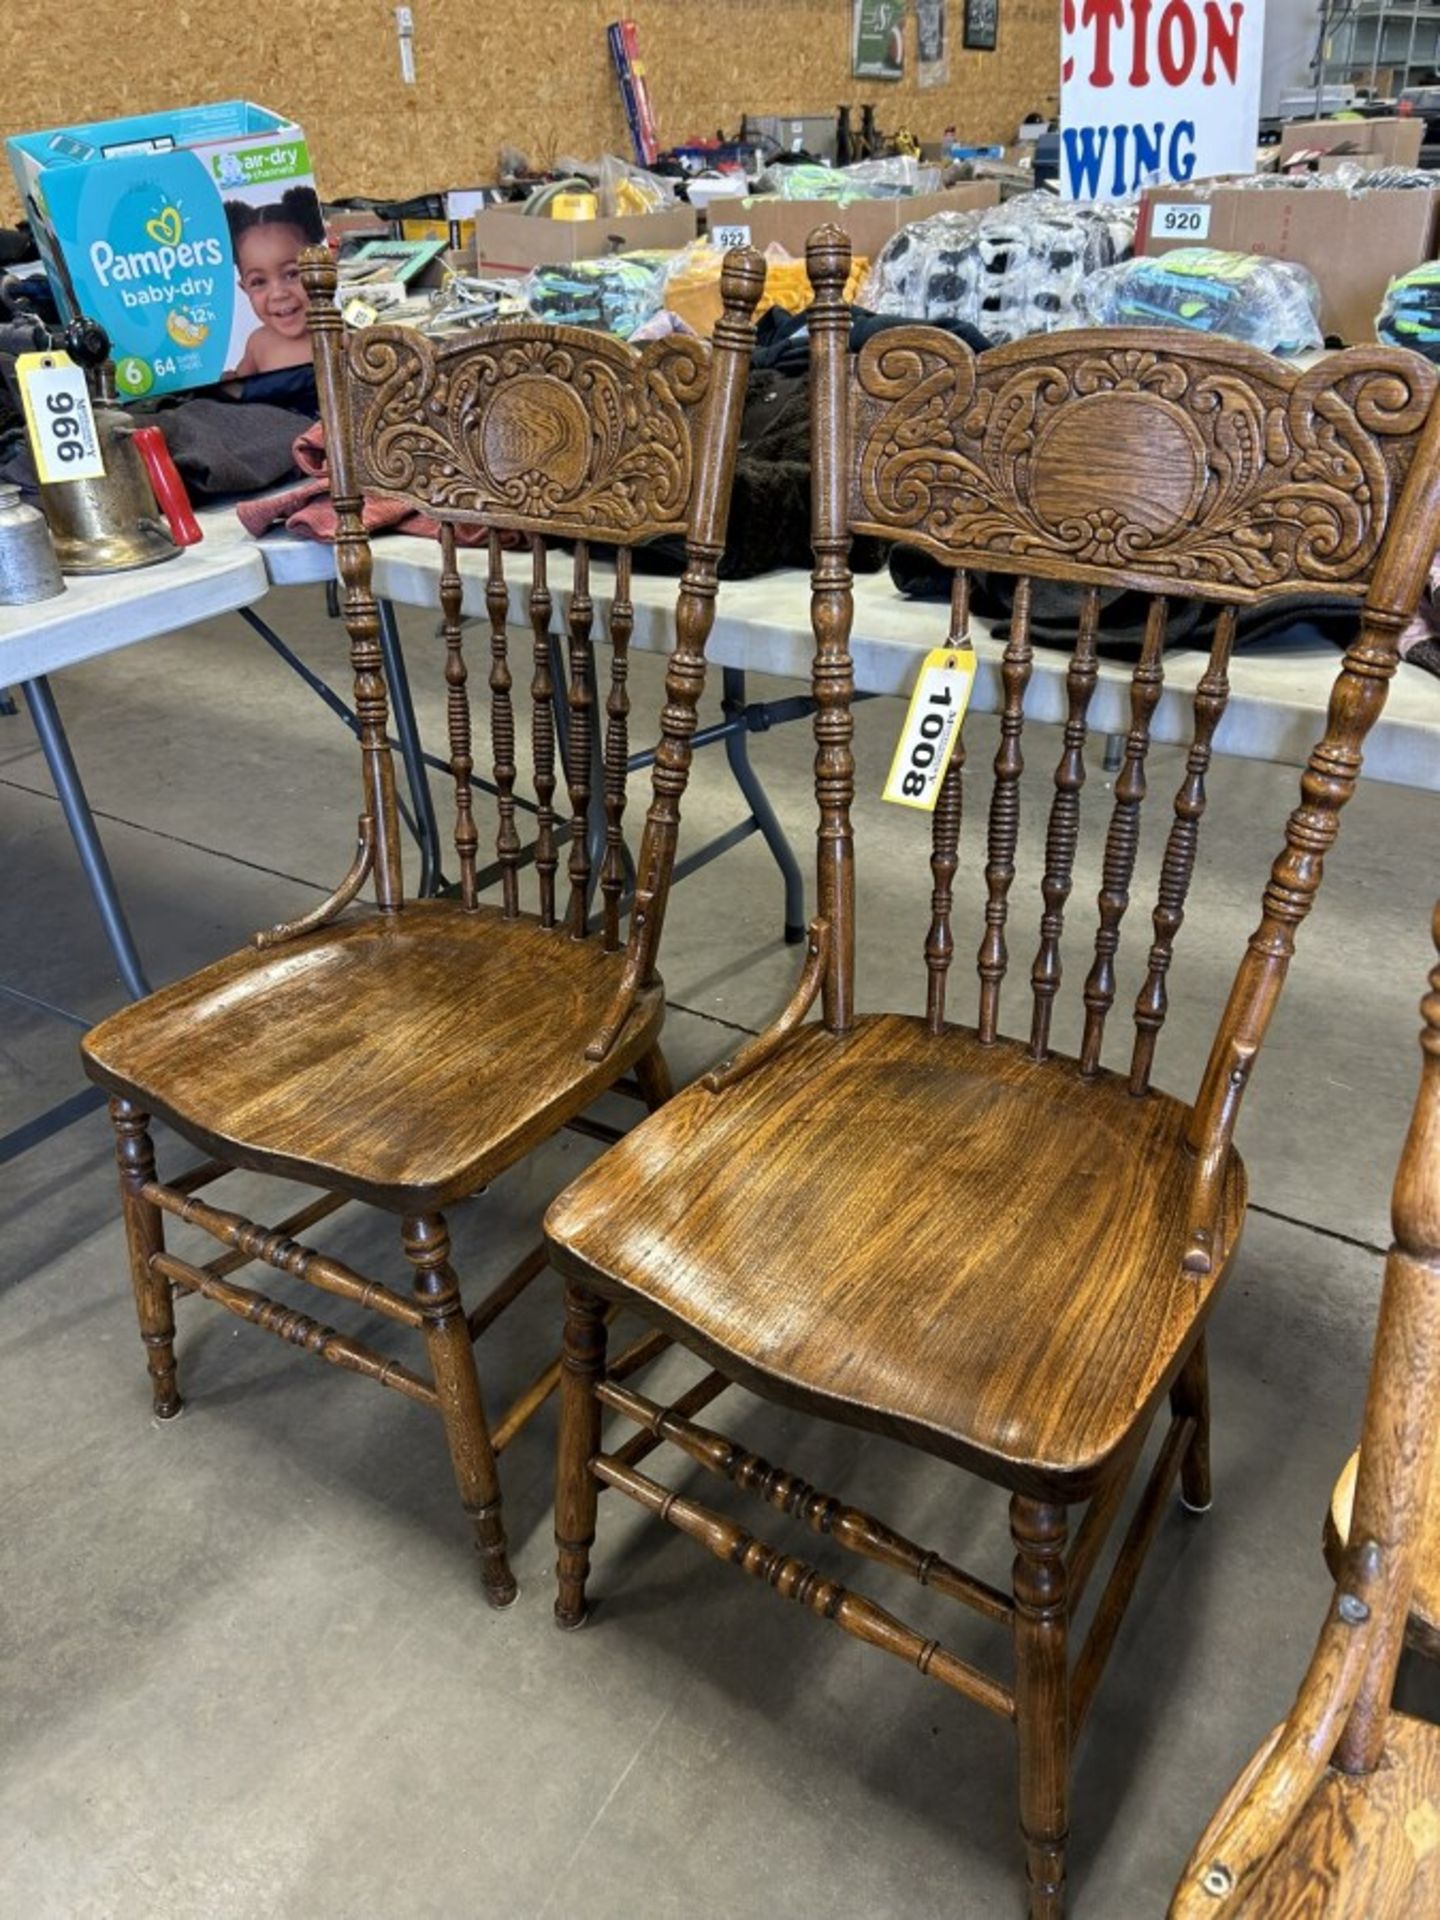 2-ANTIQUE WOODEN PRESS BACK CHAIRS (TIMES THE MONEY X2) - Image 2 of 4